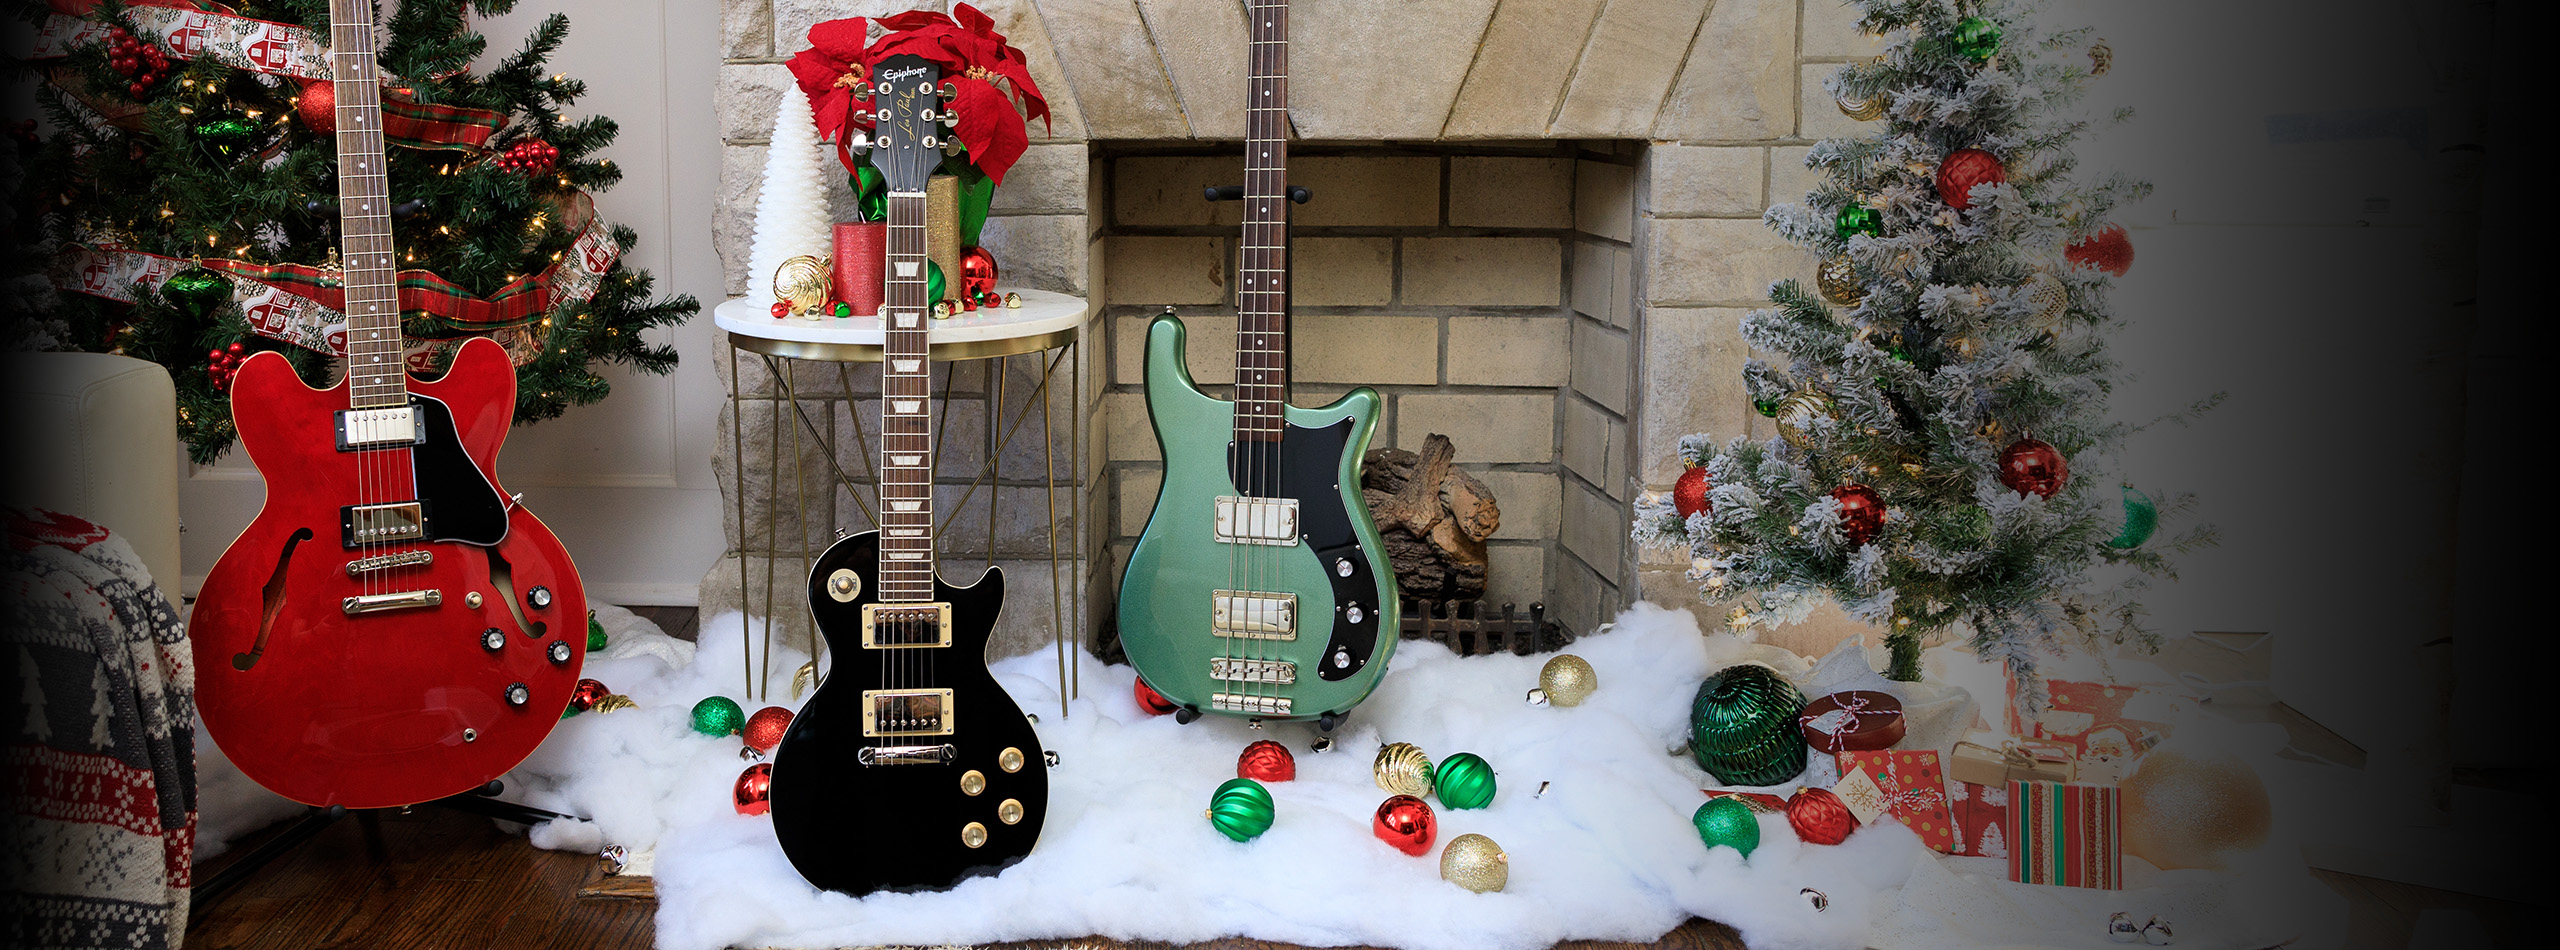 image EPIPHONE GIFT GUIDE